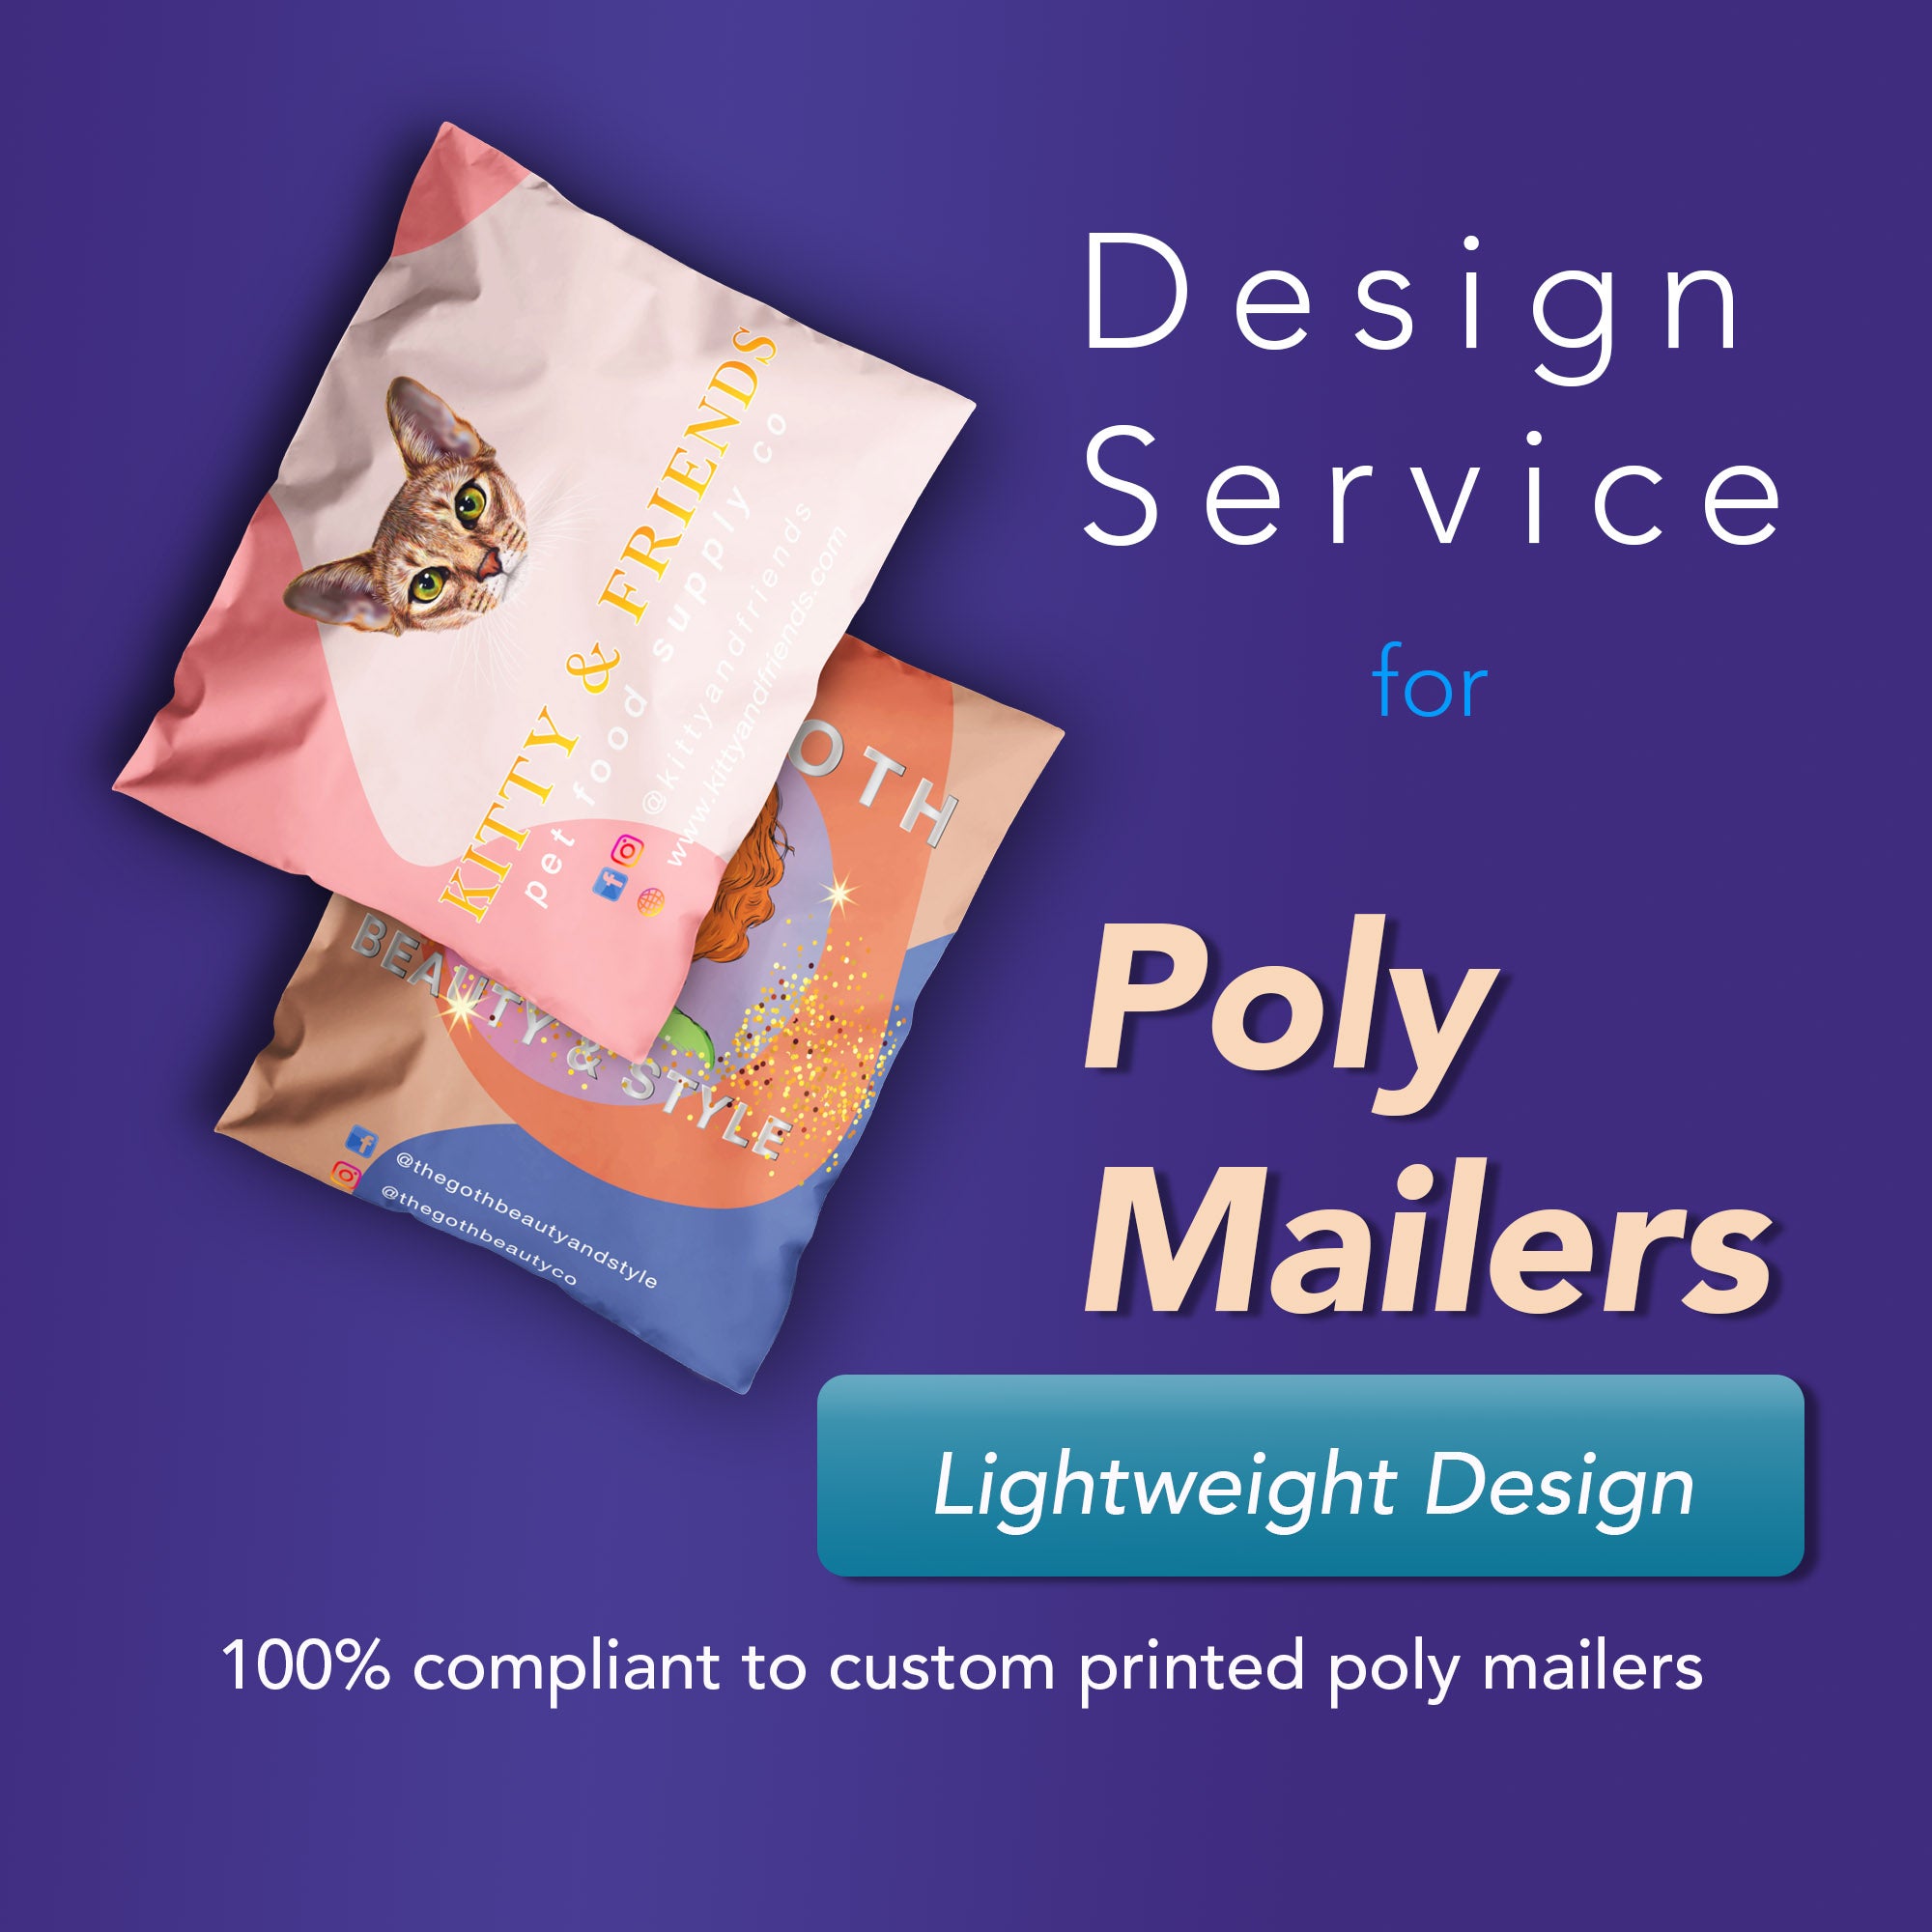 If you have only have your logo and wish to make the design more vivid using our templates, I would recommend choosing 'LIGHTWEIGHT DESIGN' service. 